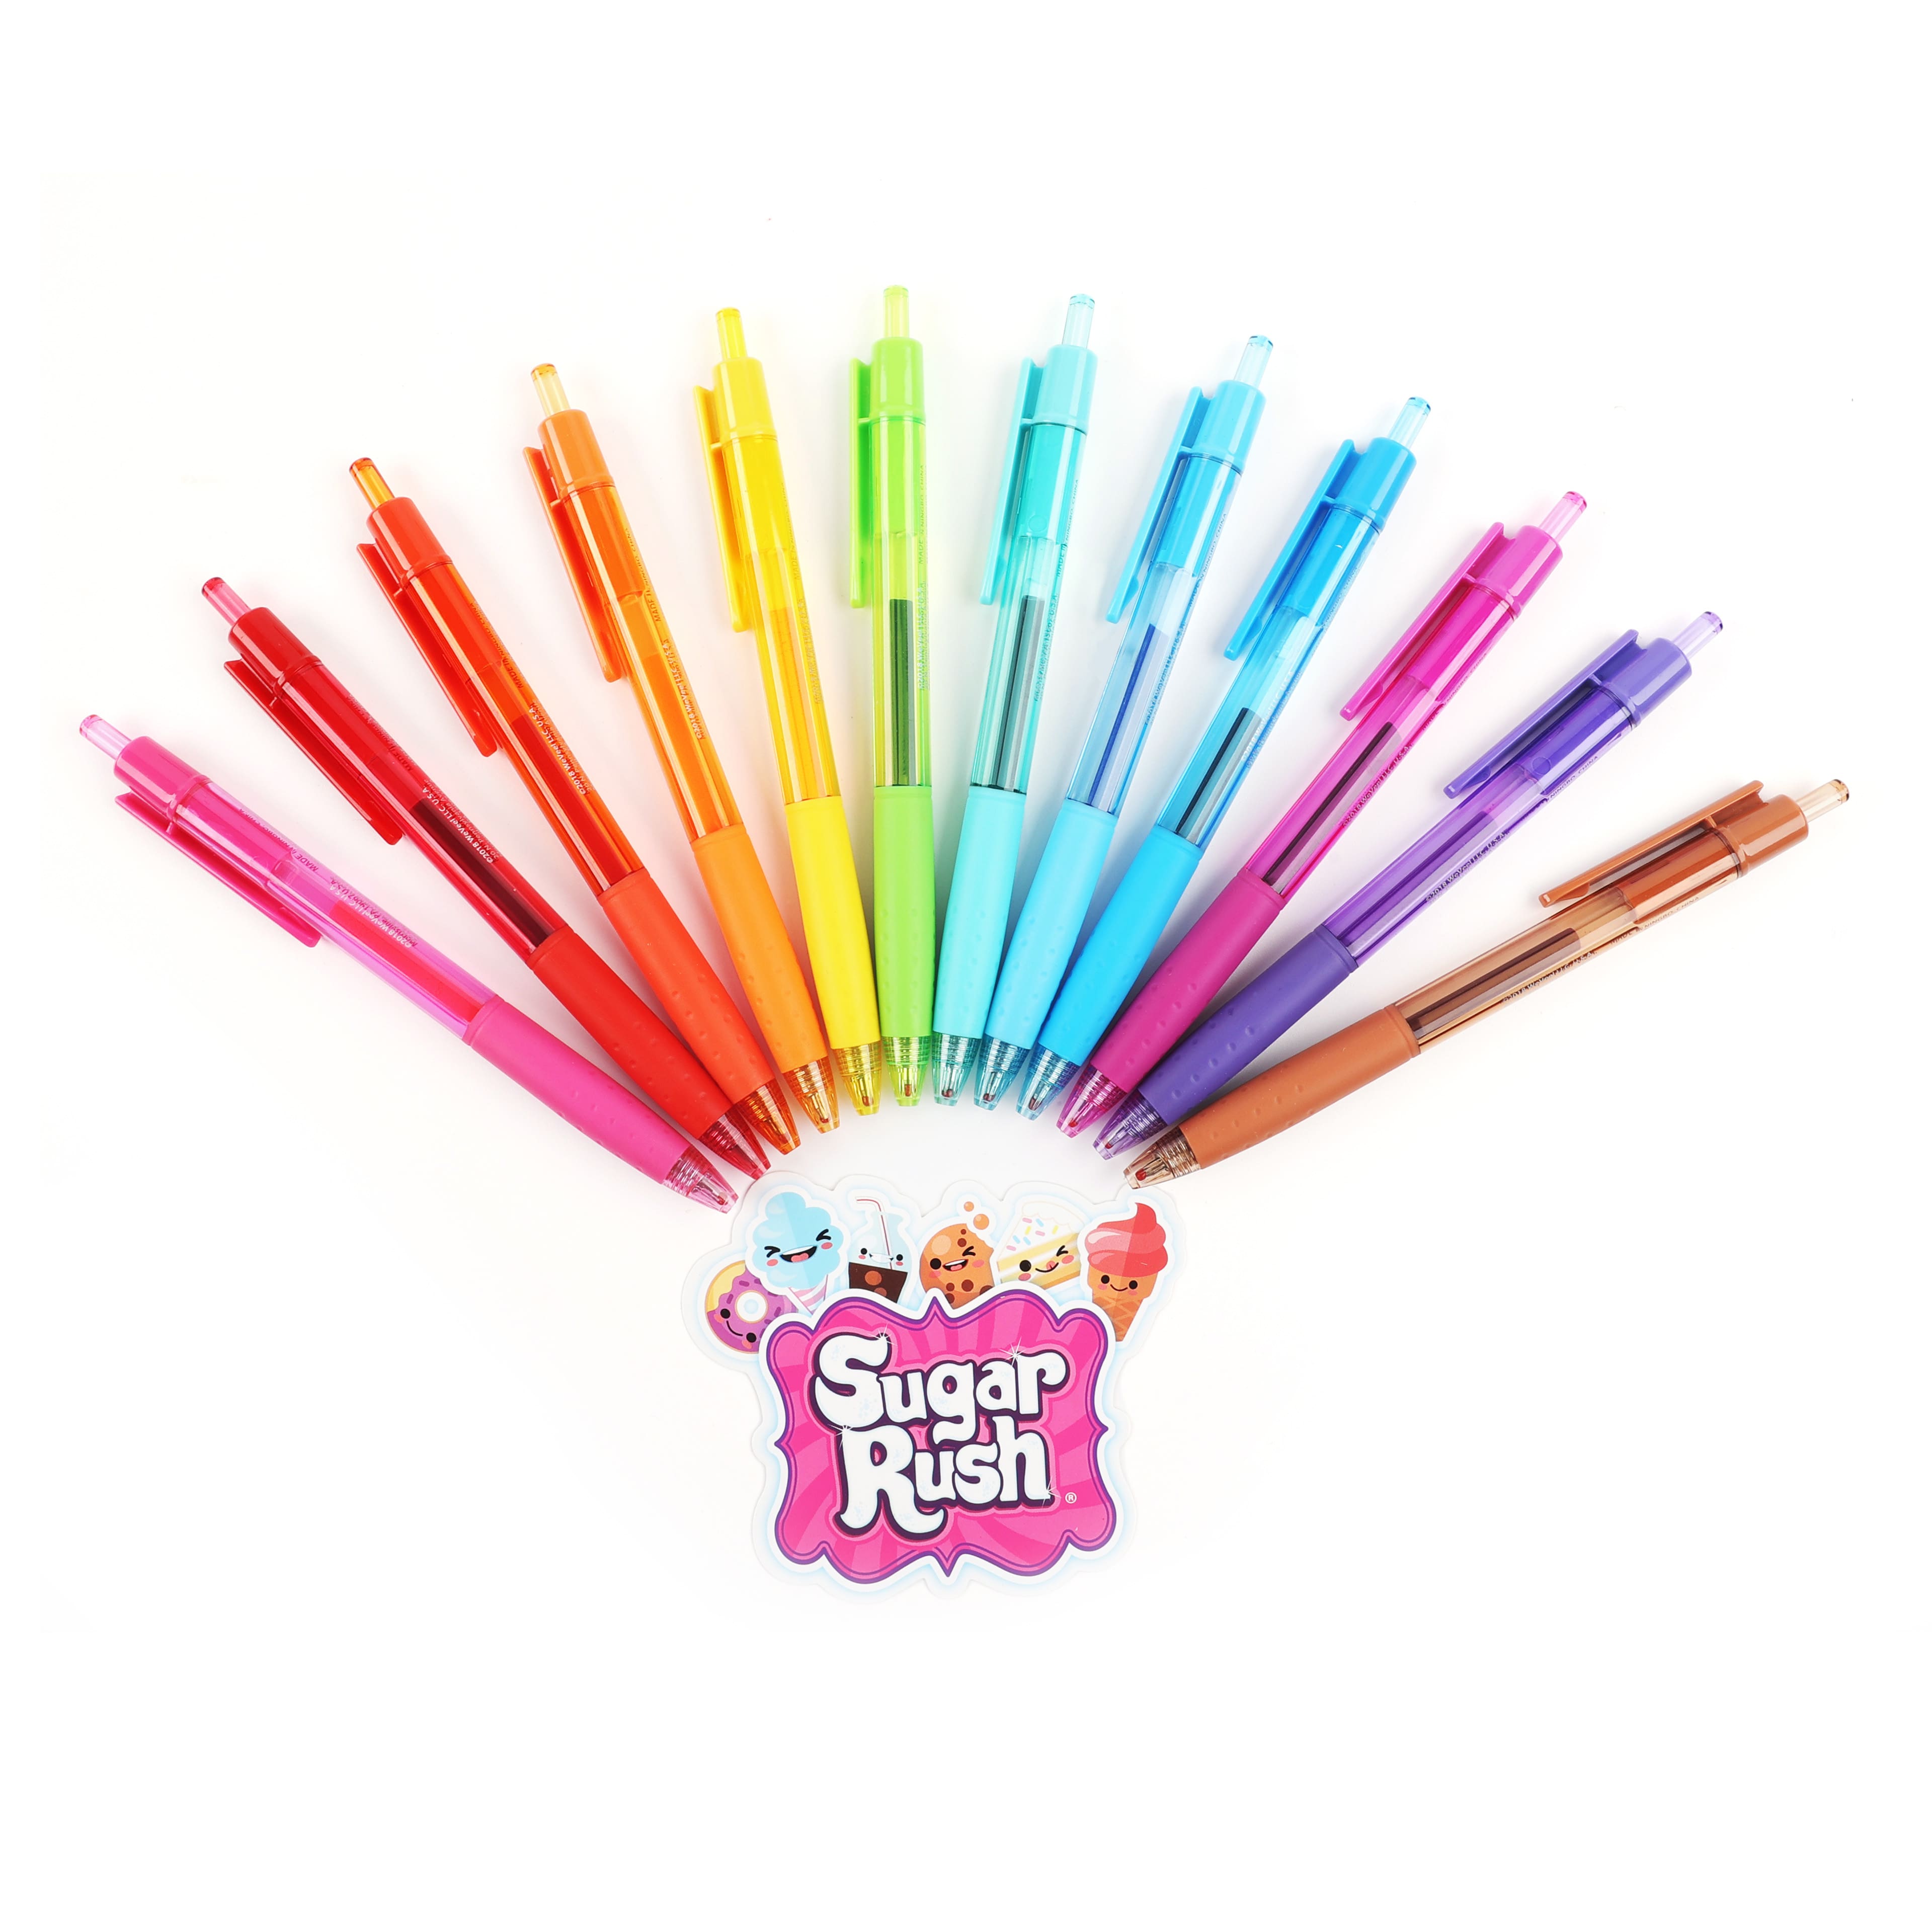 Cheap Kids Deals - *AD Scentos Candy Scented Gel Pens Sugar Rush Pack of 20  £4.99  *